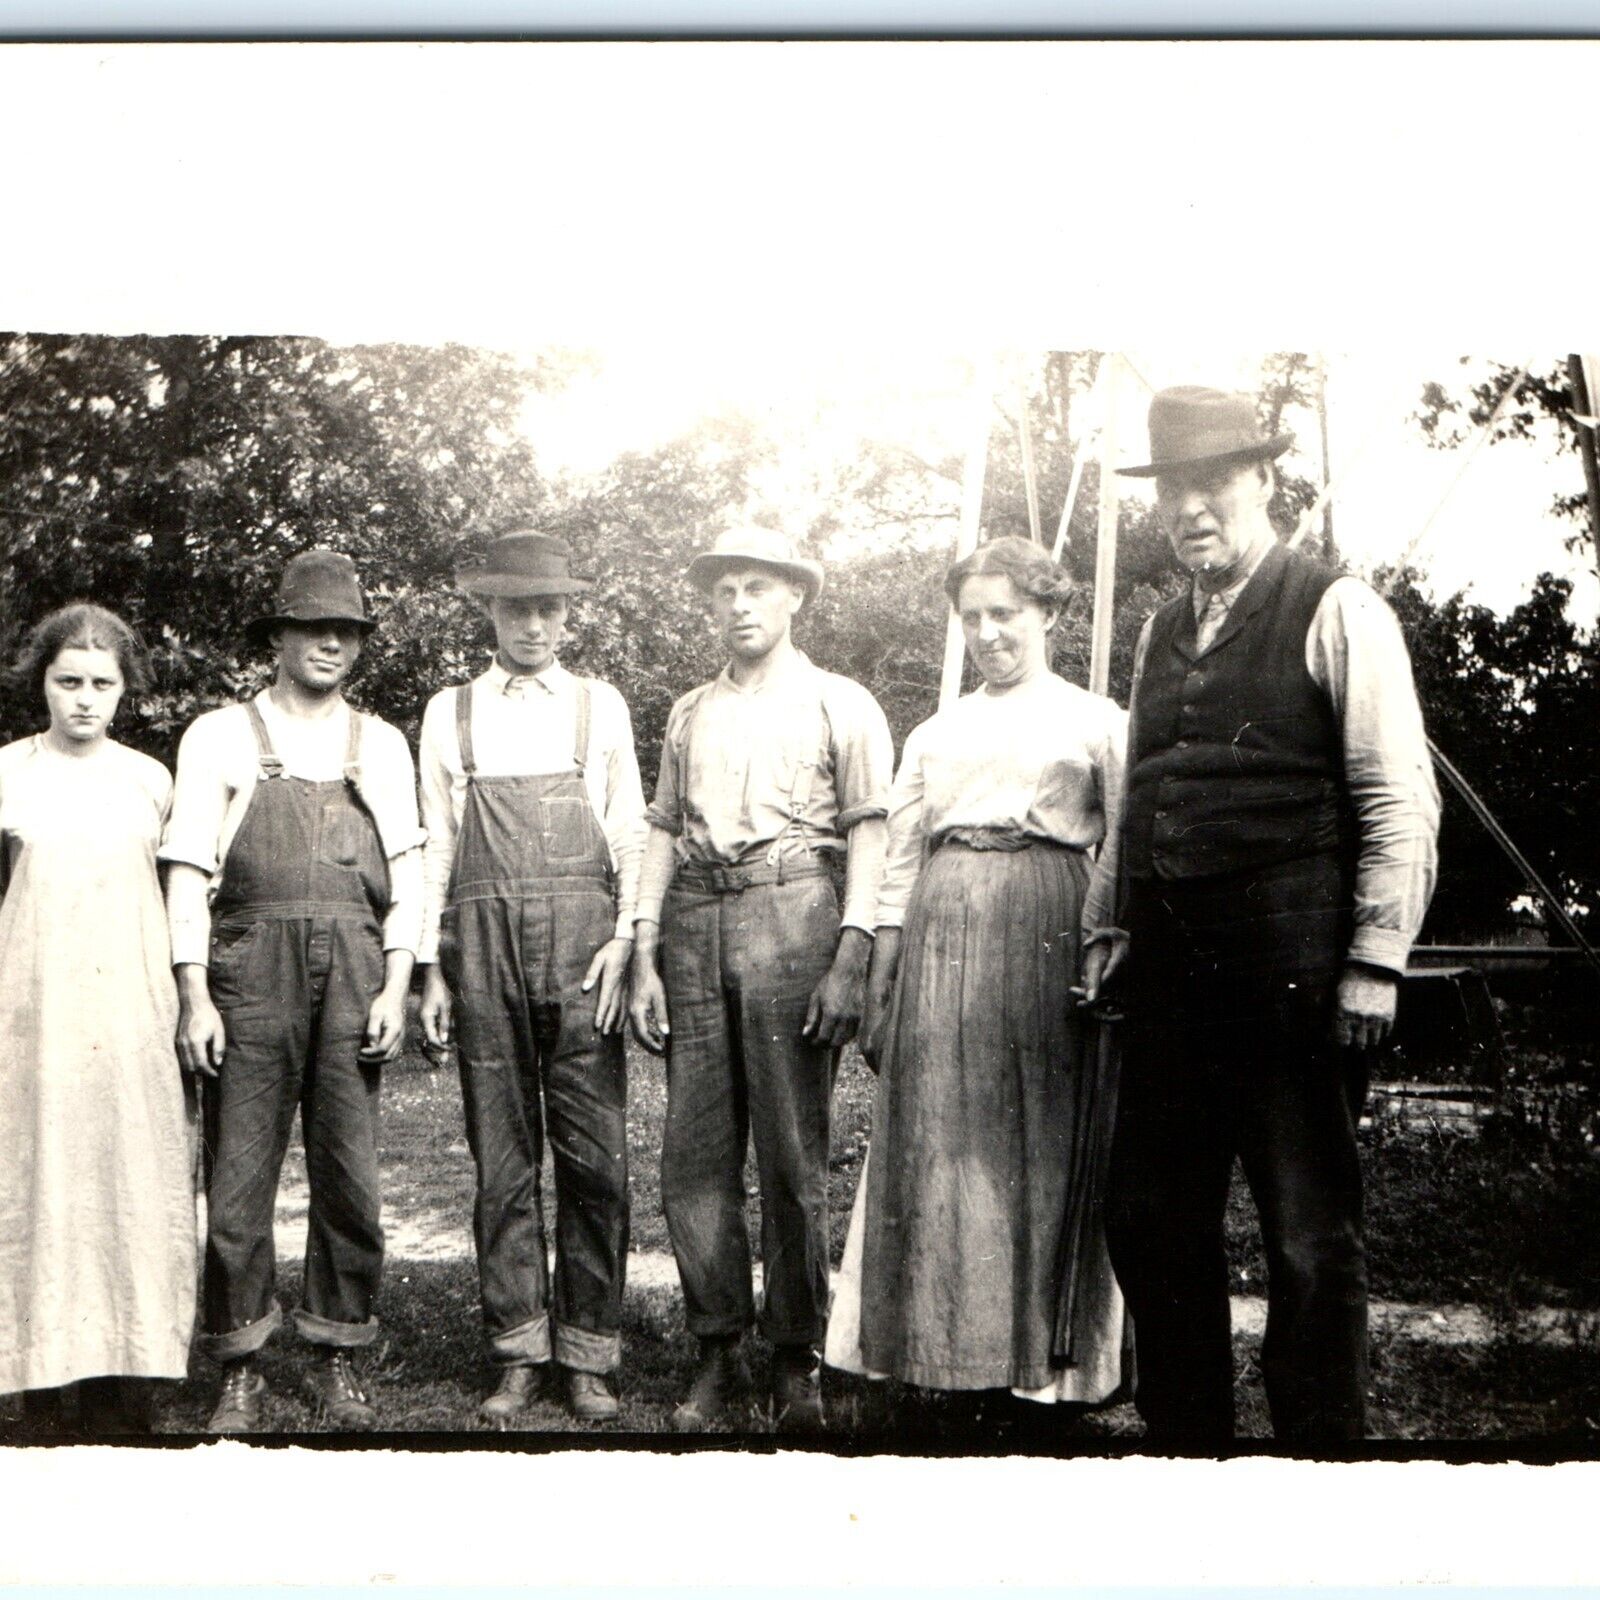 c1910s Family Farm Outdoors RPPC Occupational Men Overalls Workers Windmill A151